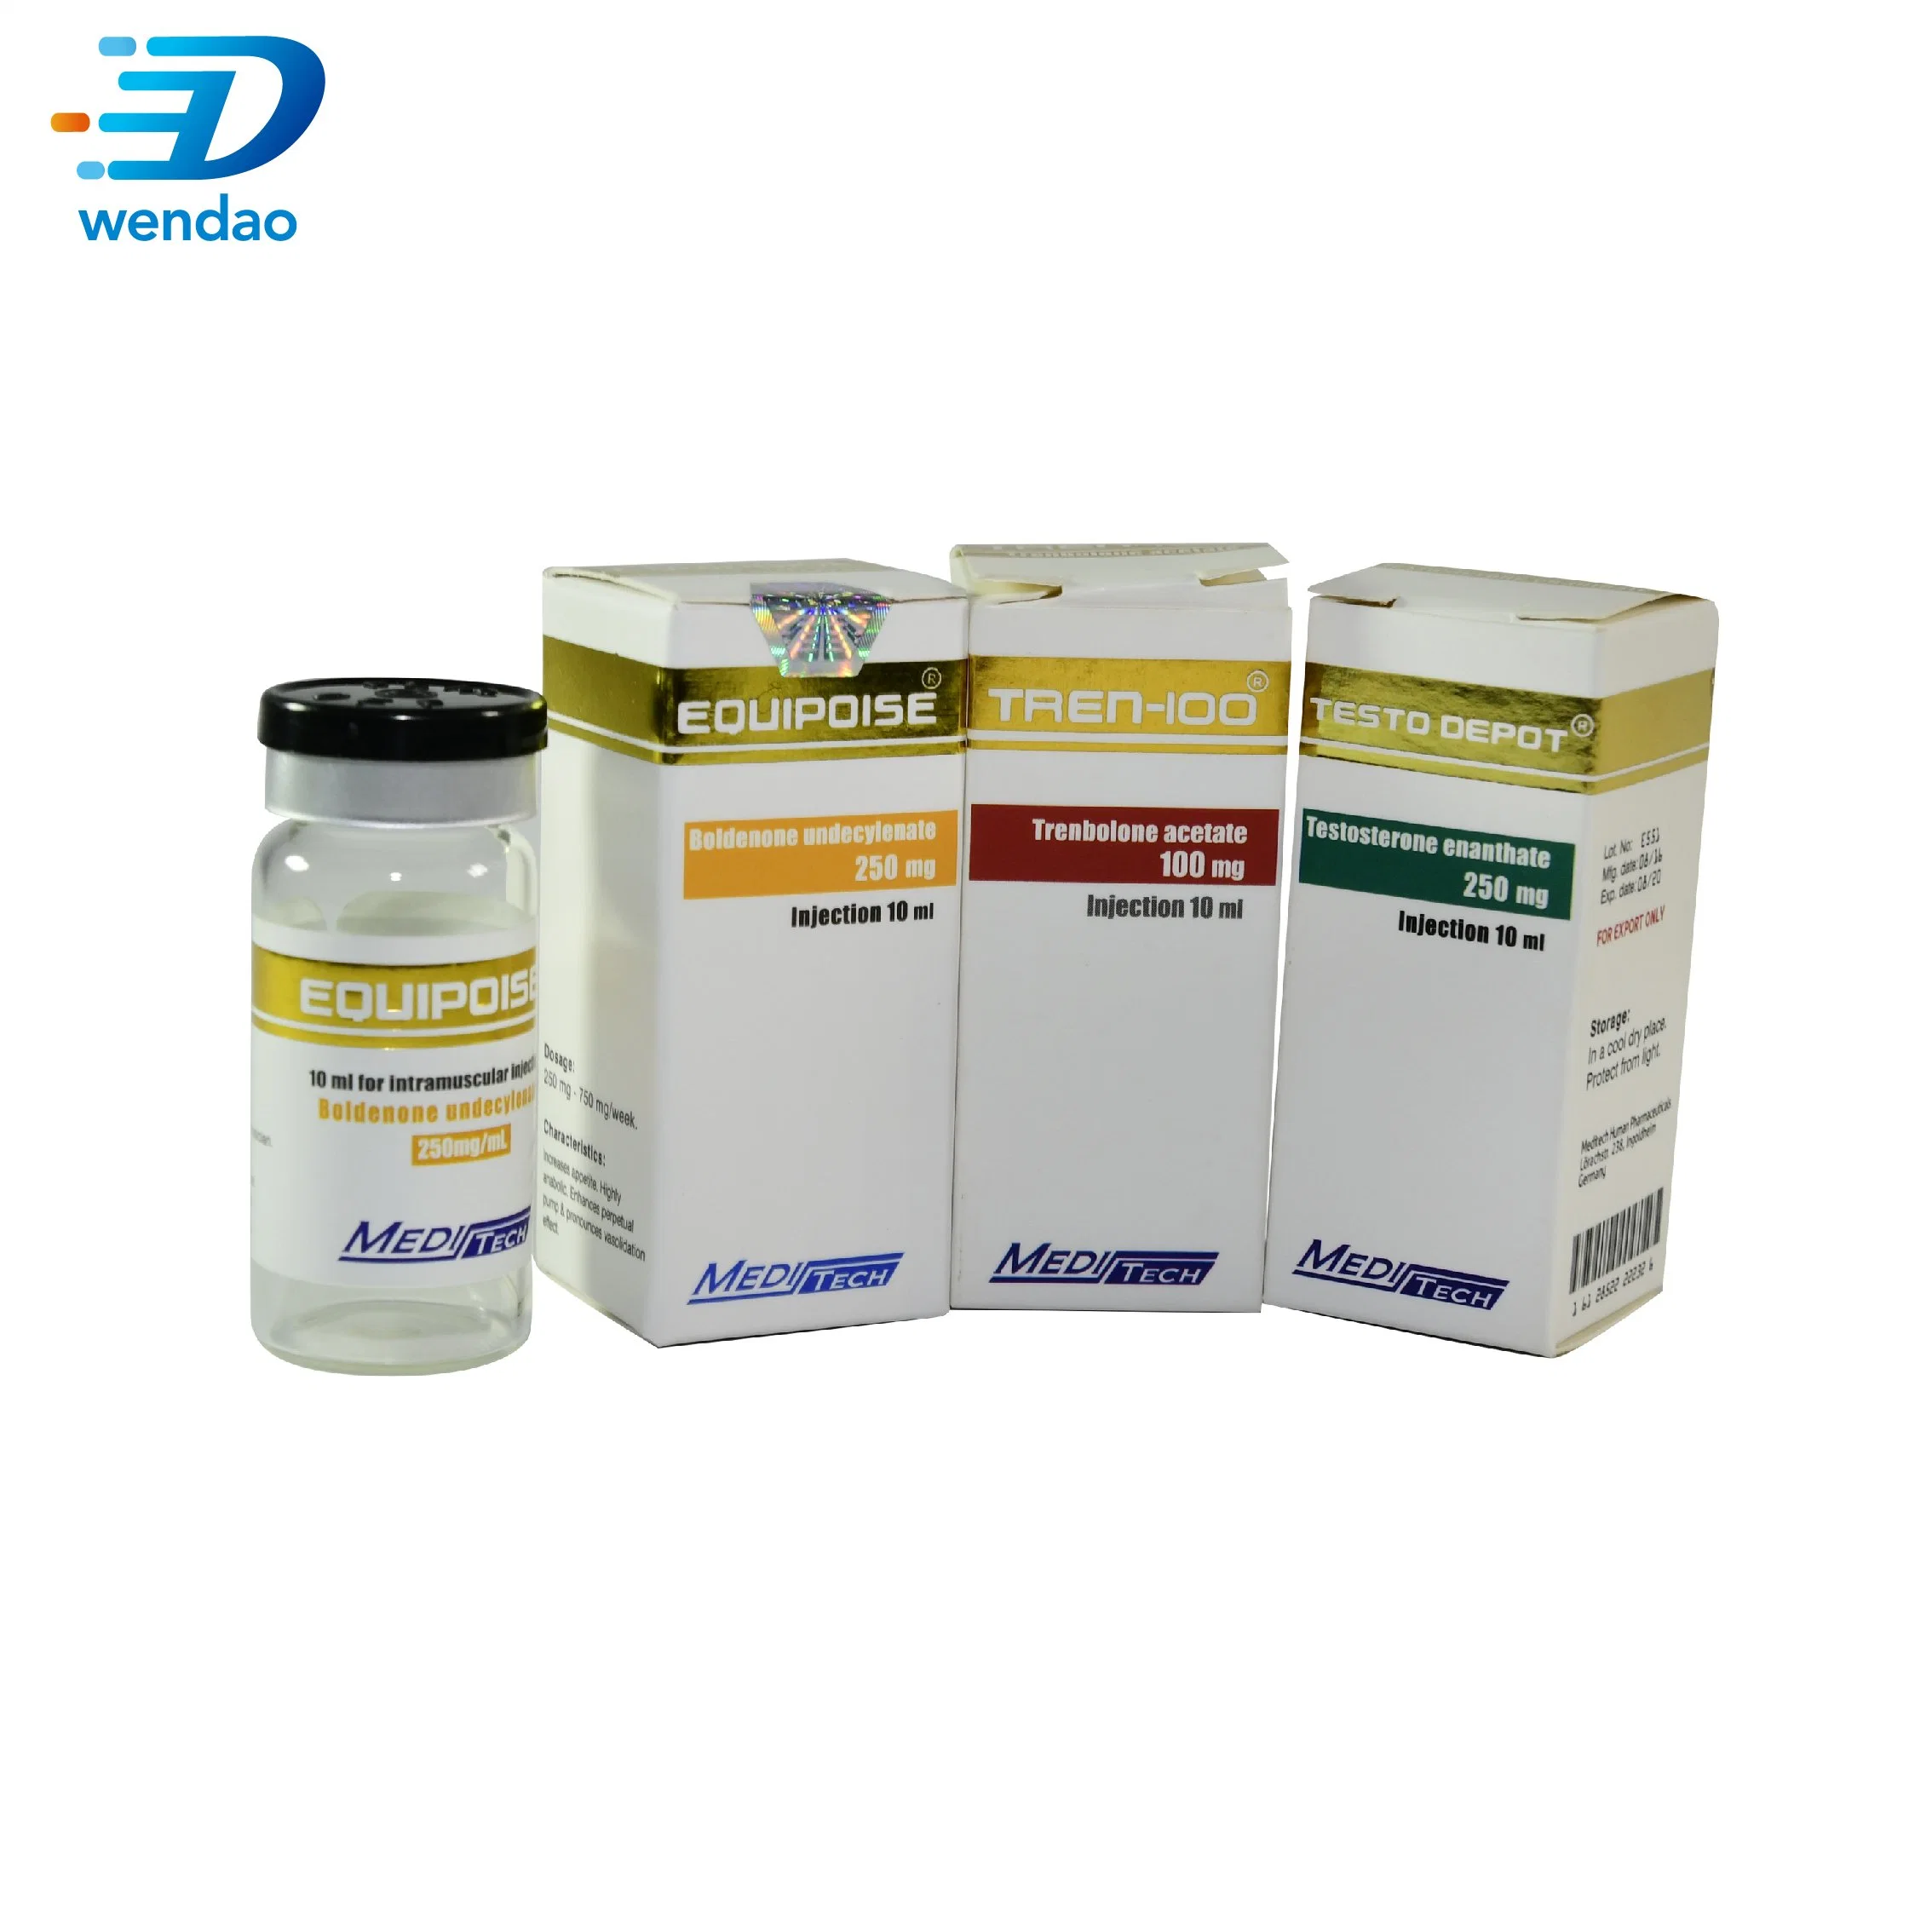 Personalized Customized Pharmaceutical Product Packaging Steroid Vial Box